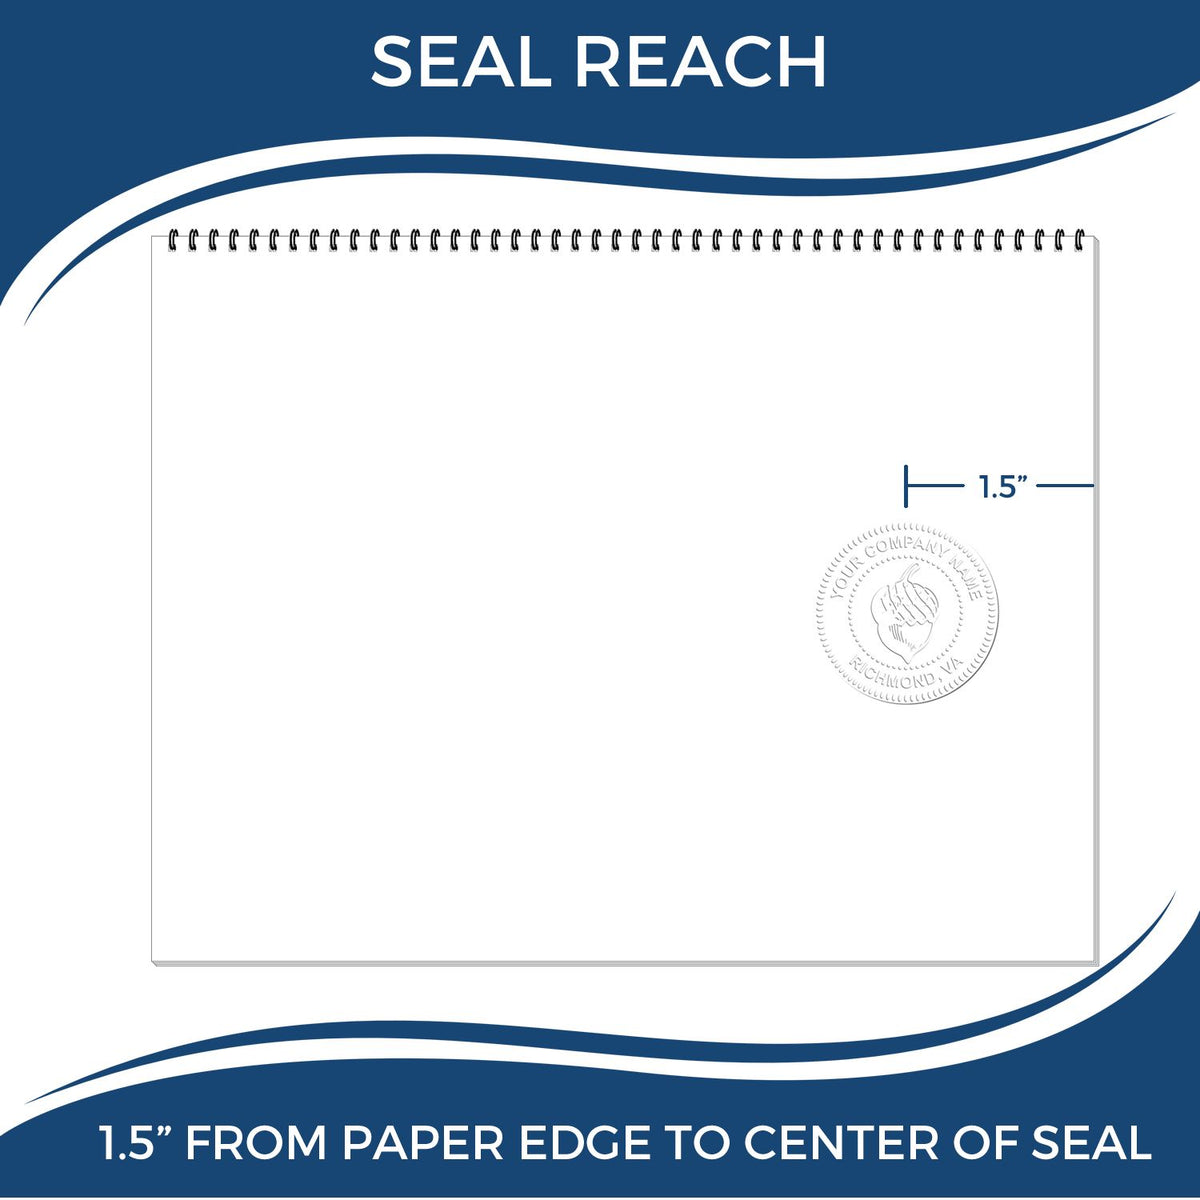 An infographic showing the seal reach which is represented by a ruler and a miniature seal image of the State of Hawaii Architectural Seal Embosser